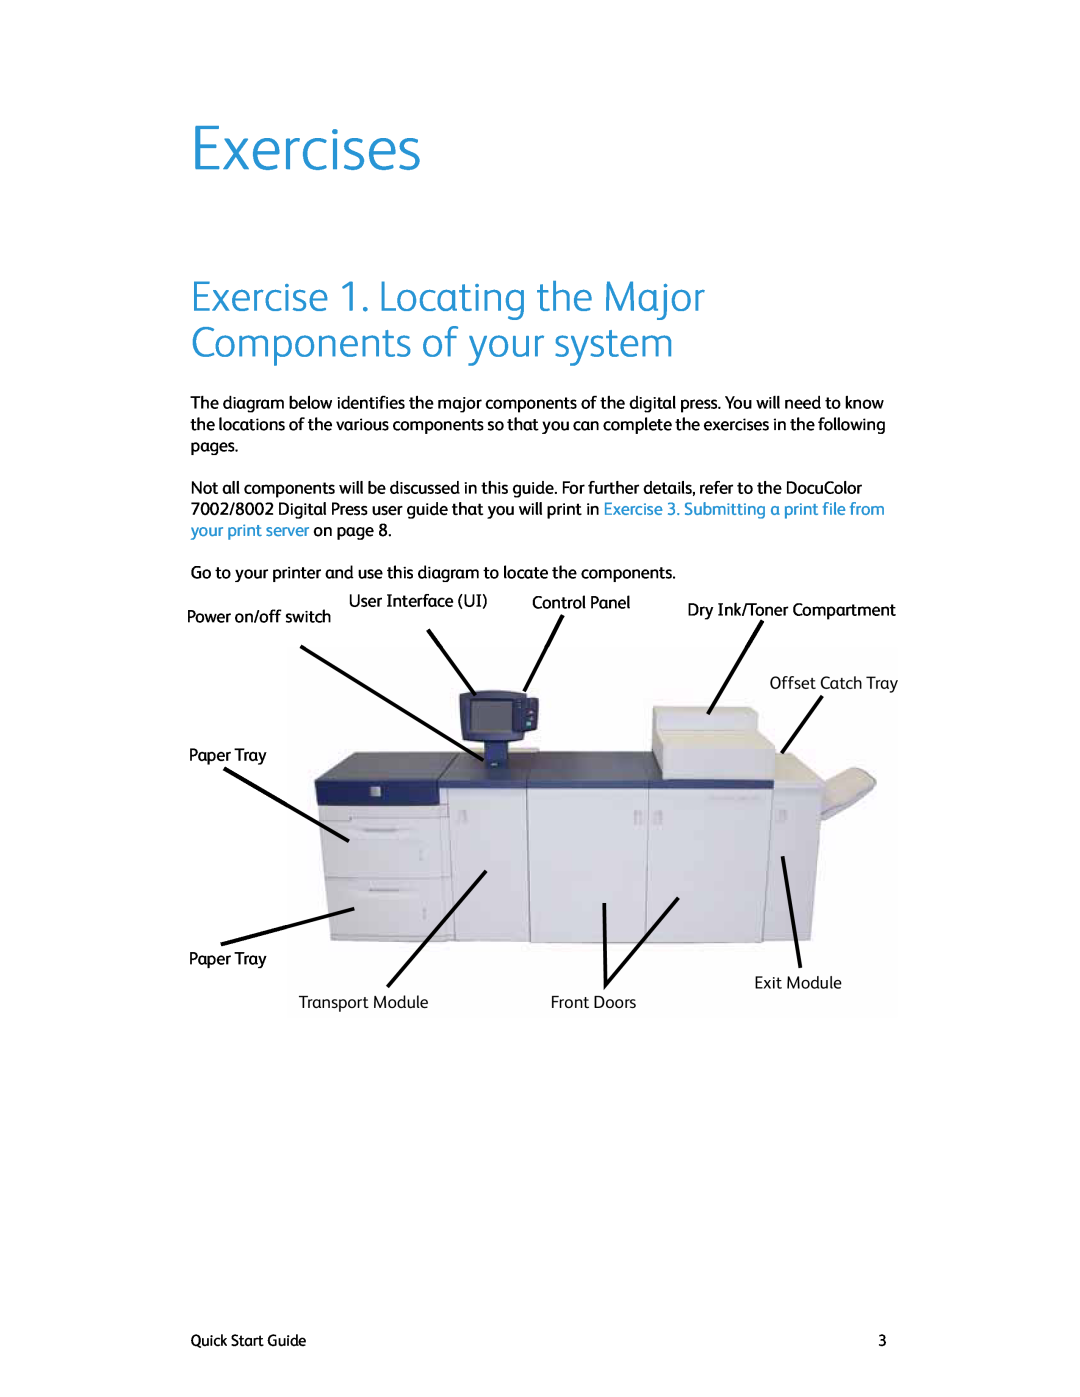 Xerox 8002, 7002 manual Exercises, Exercise 1. Locating the Major Components of your system 